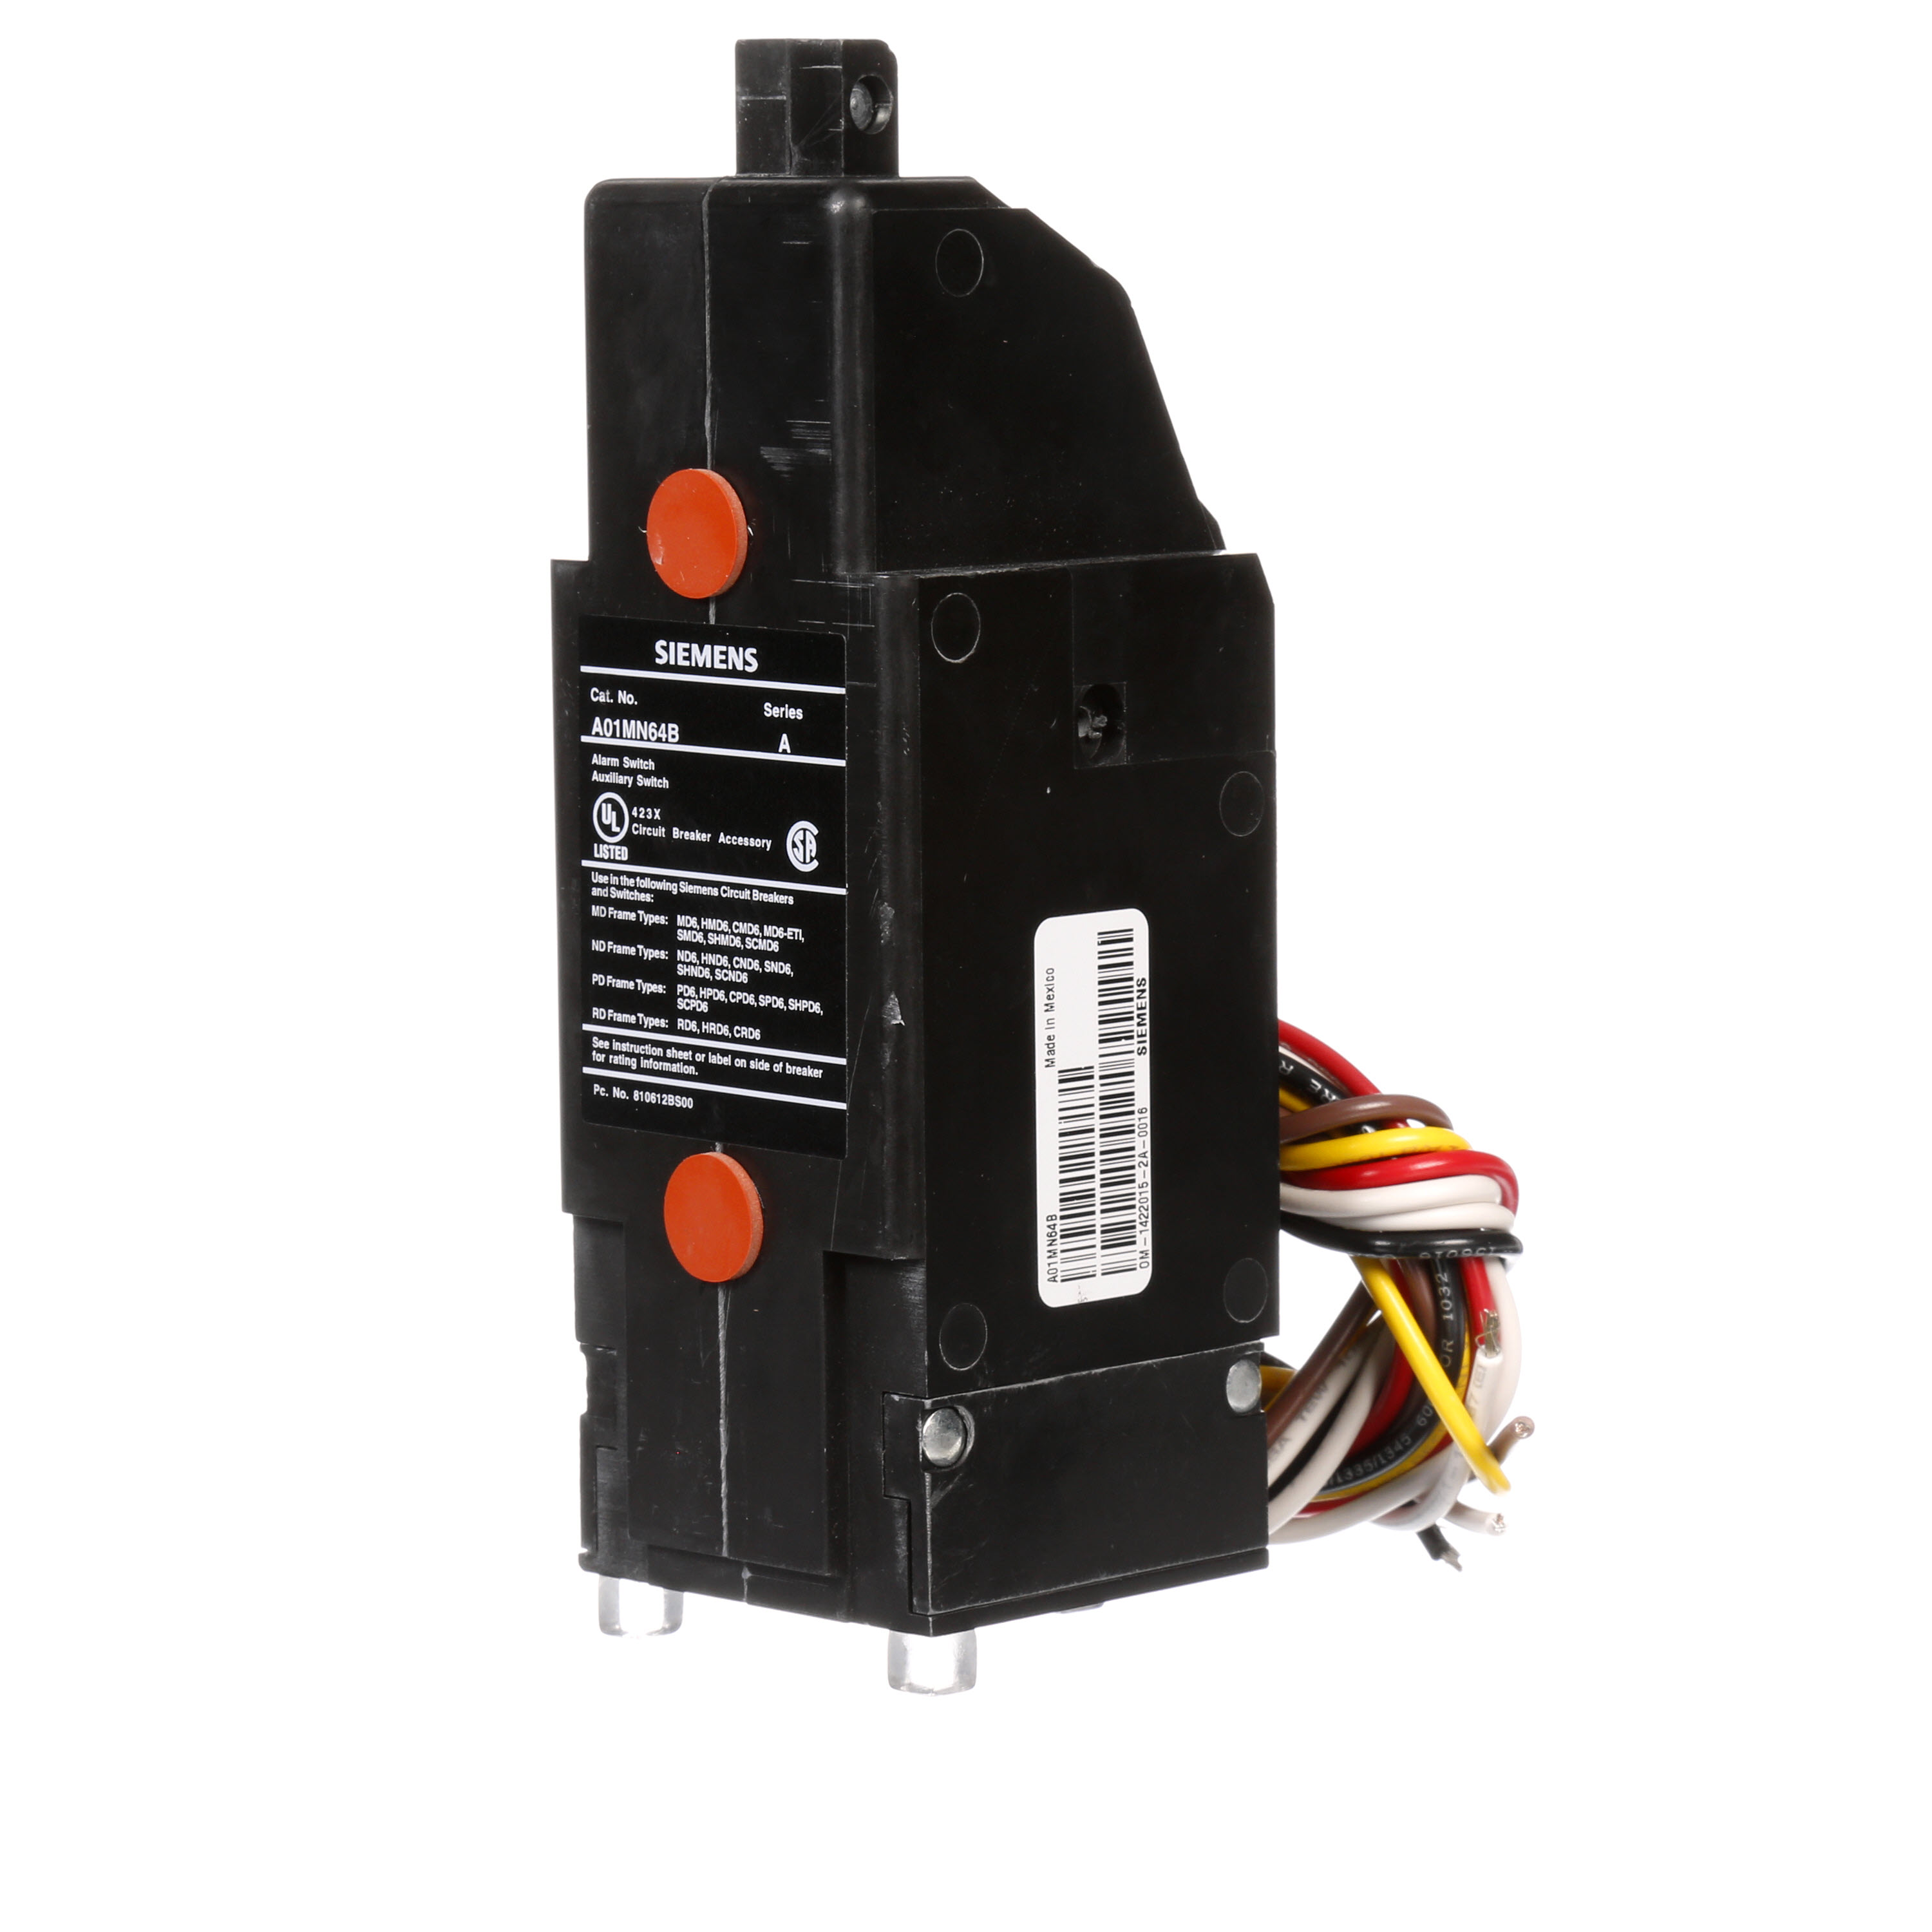 SIEMENS LOW VOLTAGE SENTRON MOLDED CASE CIRCUIT BREAKER INTERNAL ACCESSORY. 480VAC BELL ALARM COMBINATION WITH FORM C 480 VAC AUXILIARY SWITCH (1NO / 1NC). SUITS MD / ND / PD / RD FRAME BREAKERS.